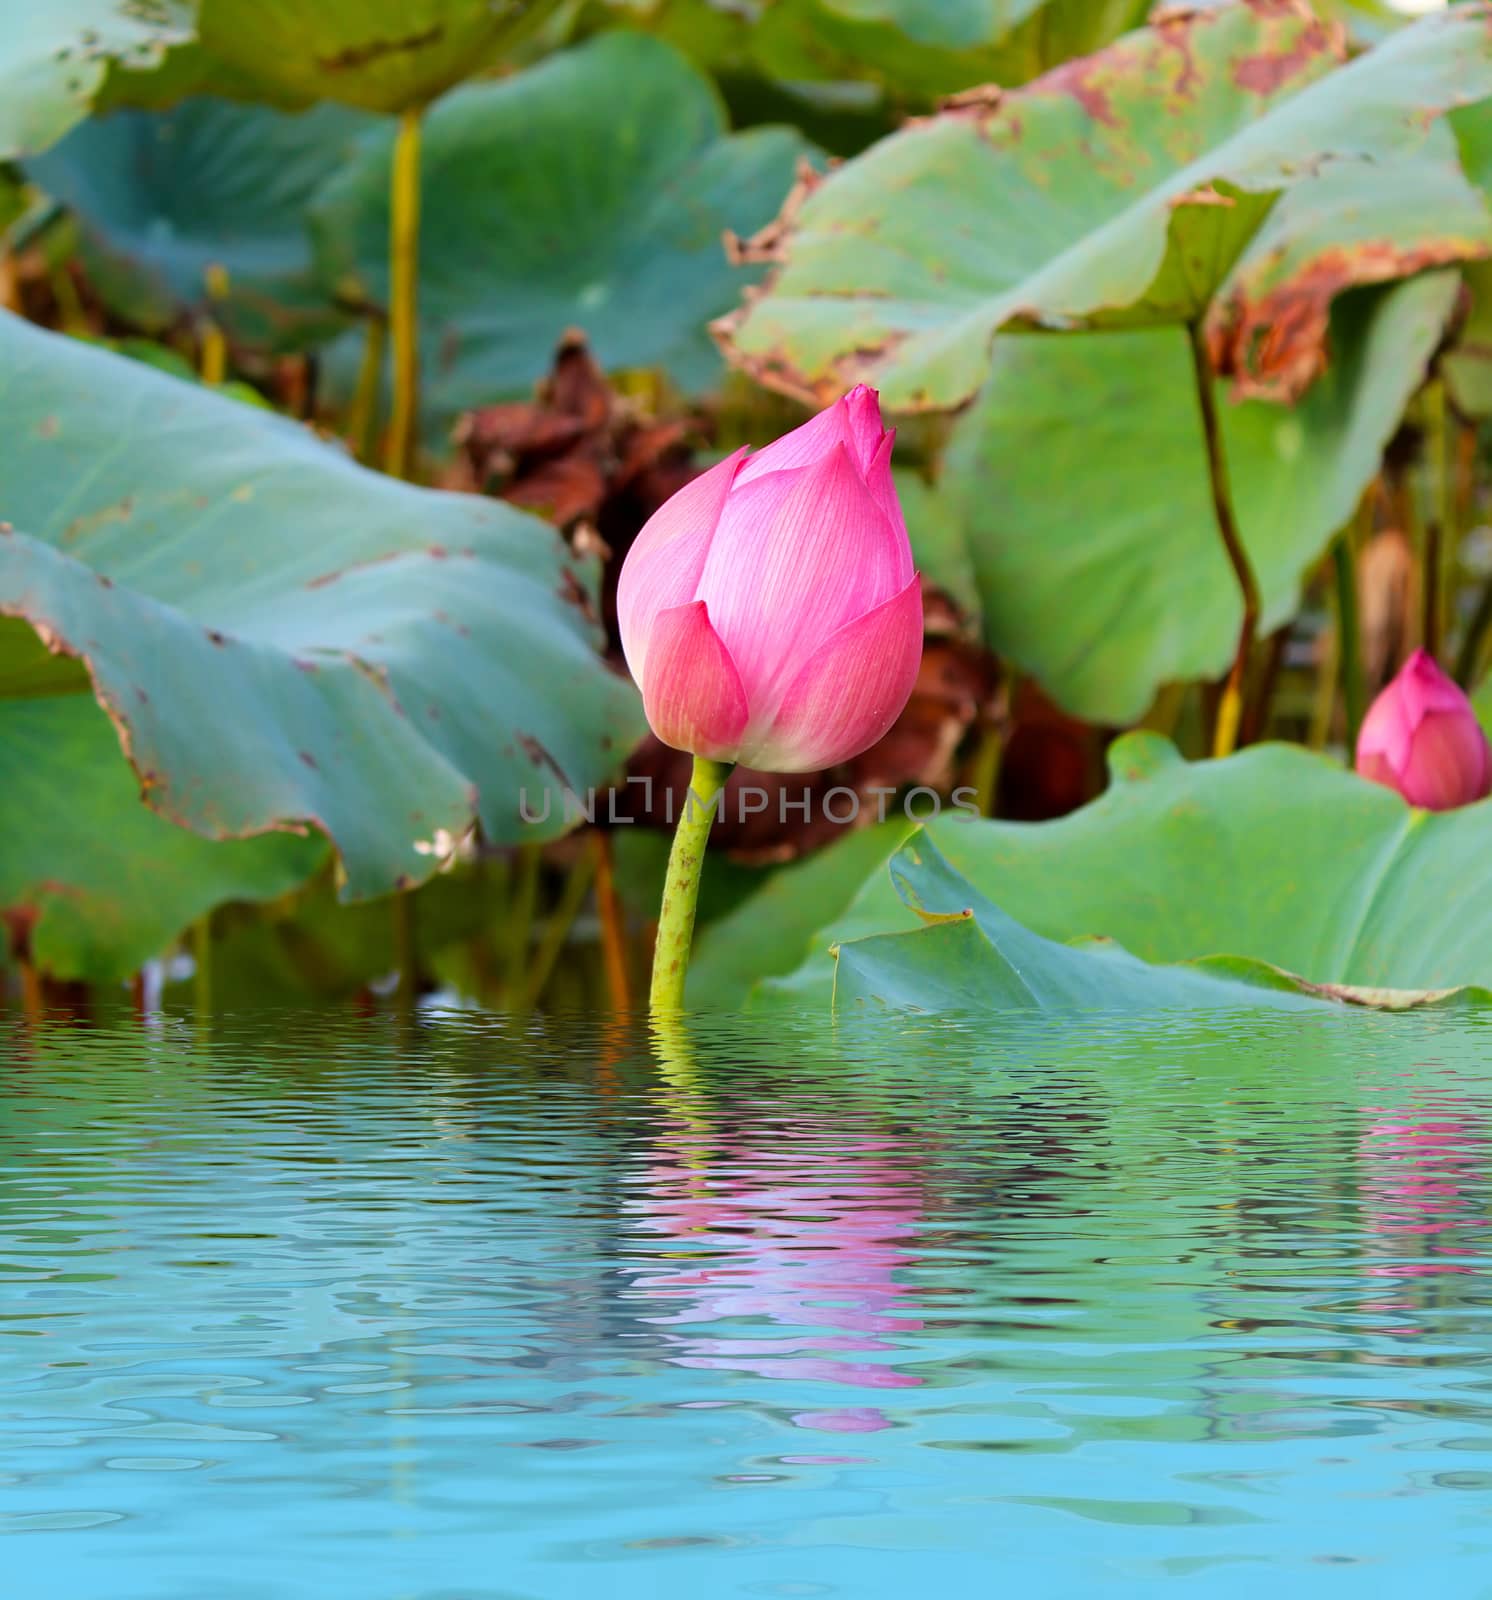 pink lotus flower among green foliage  by dinhngochung